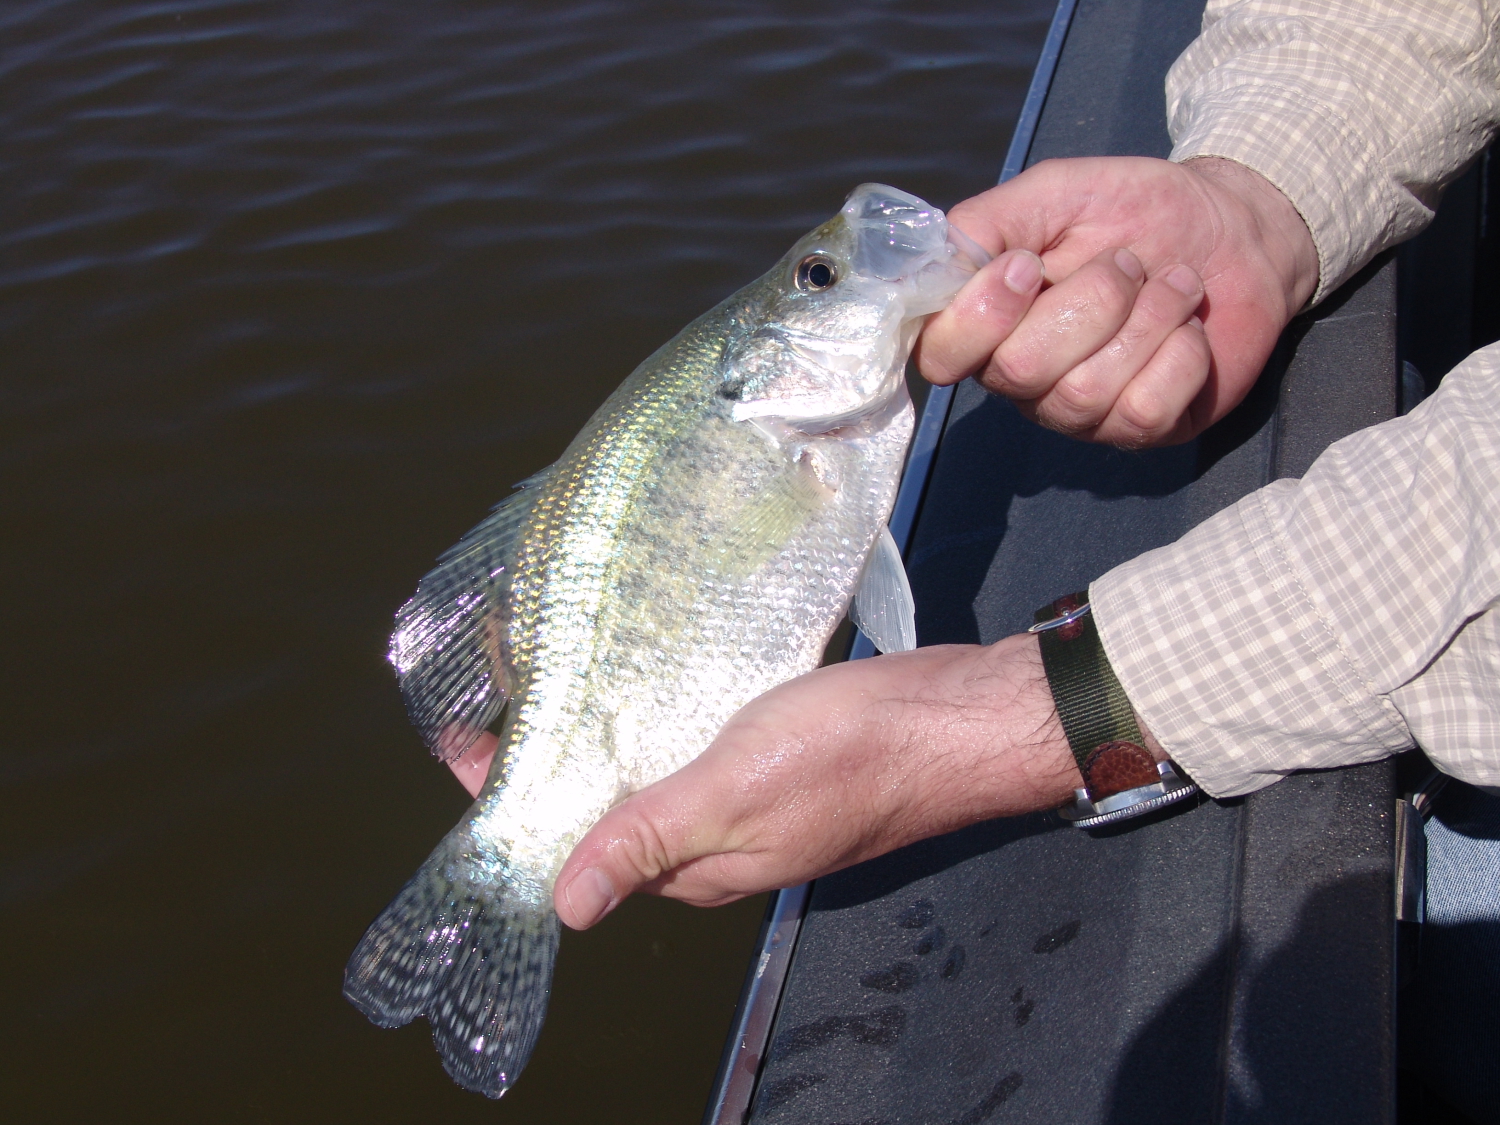 Hands are holding up a Crappie